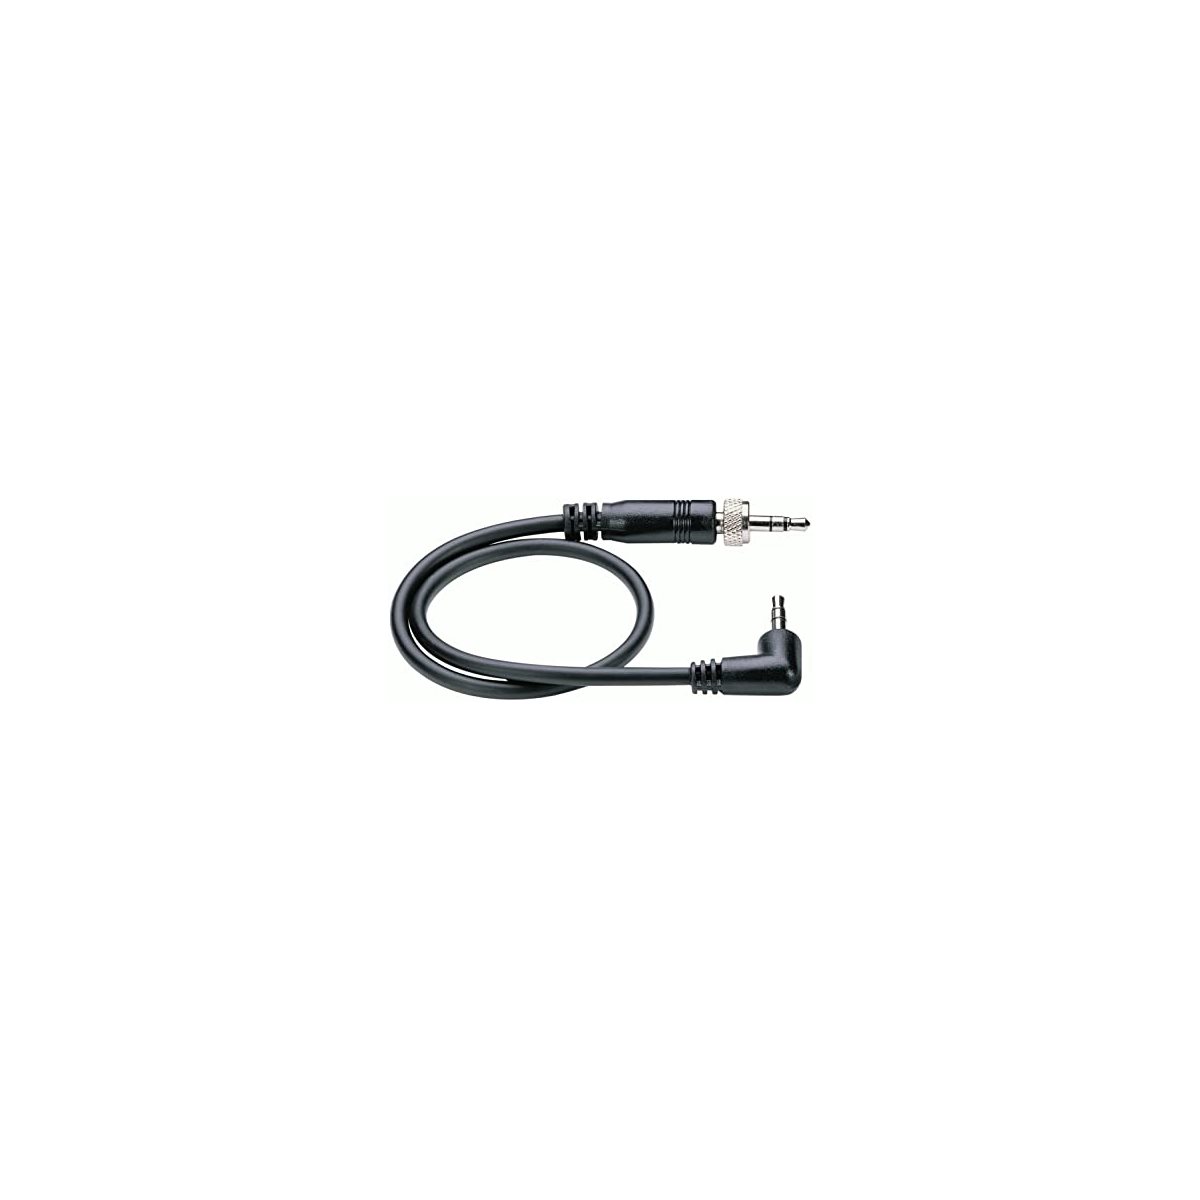 SENNHEISER - CL1 - 3.5mm to 3.5mm Output Cable for EW Series Camera-Mount Receiver